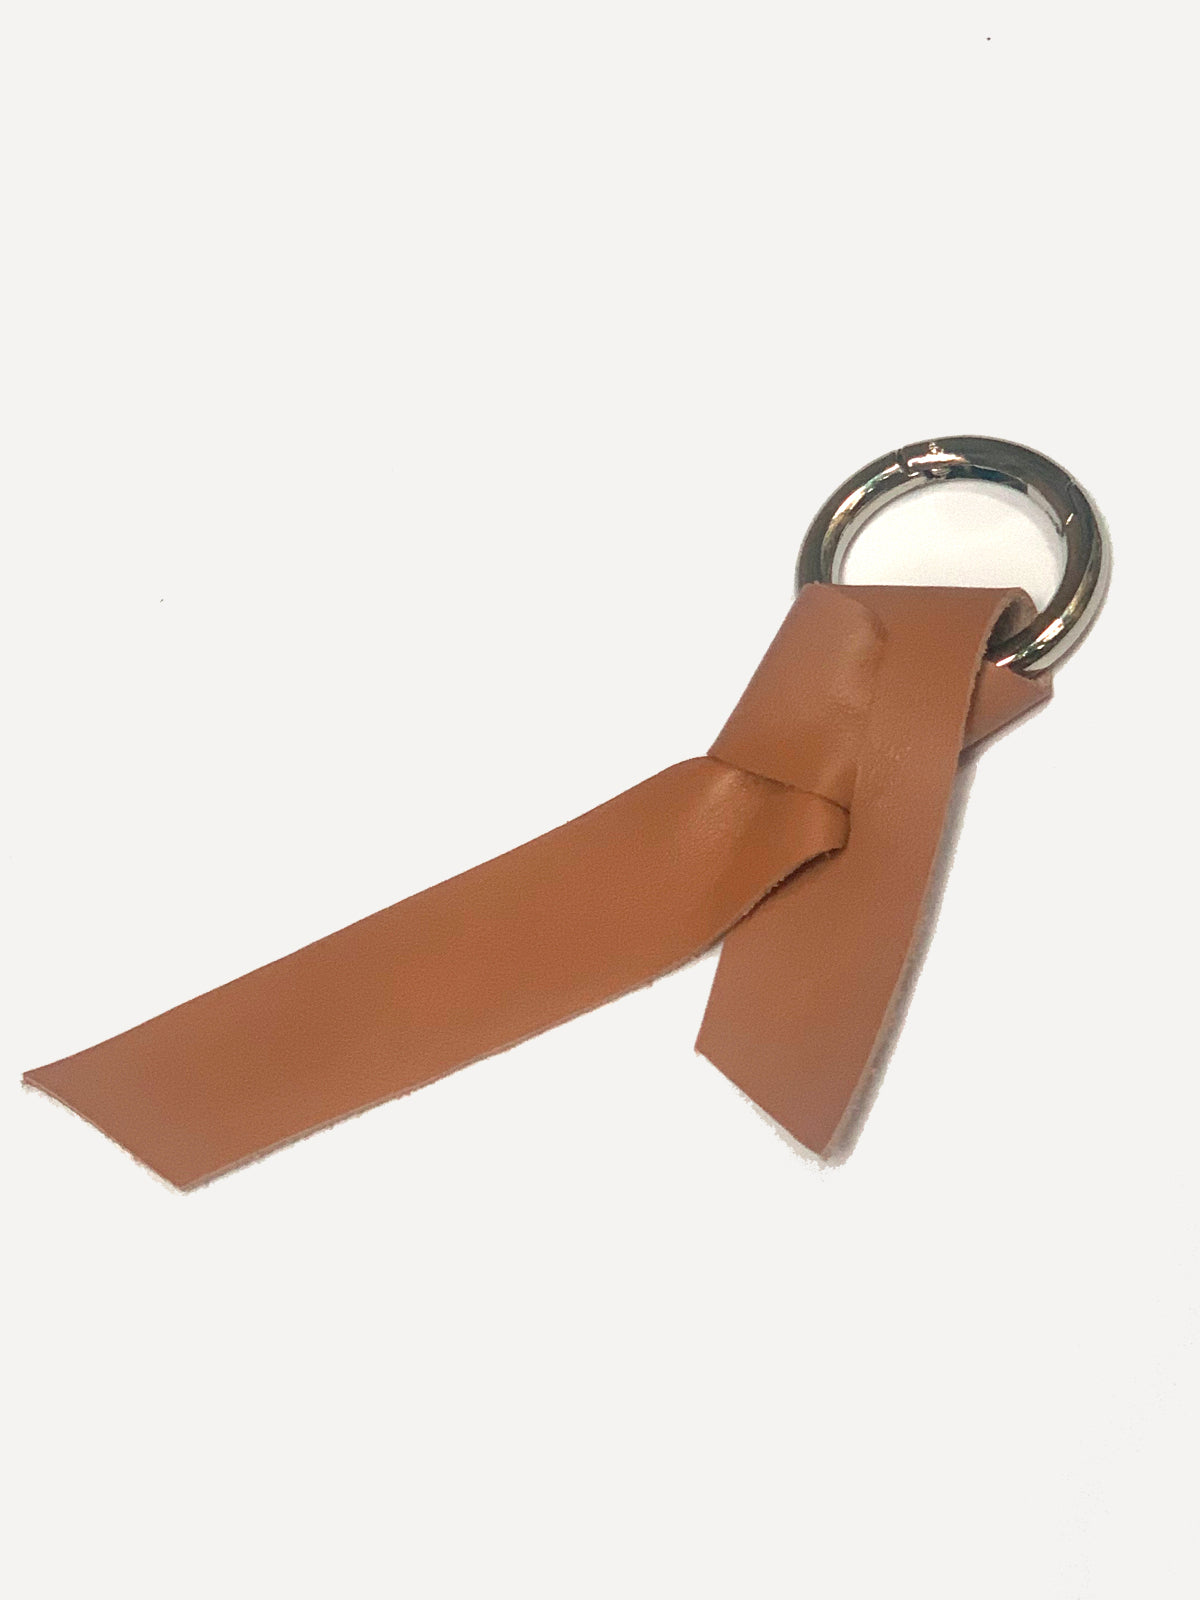 Knotted, brown leather key chain